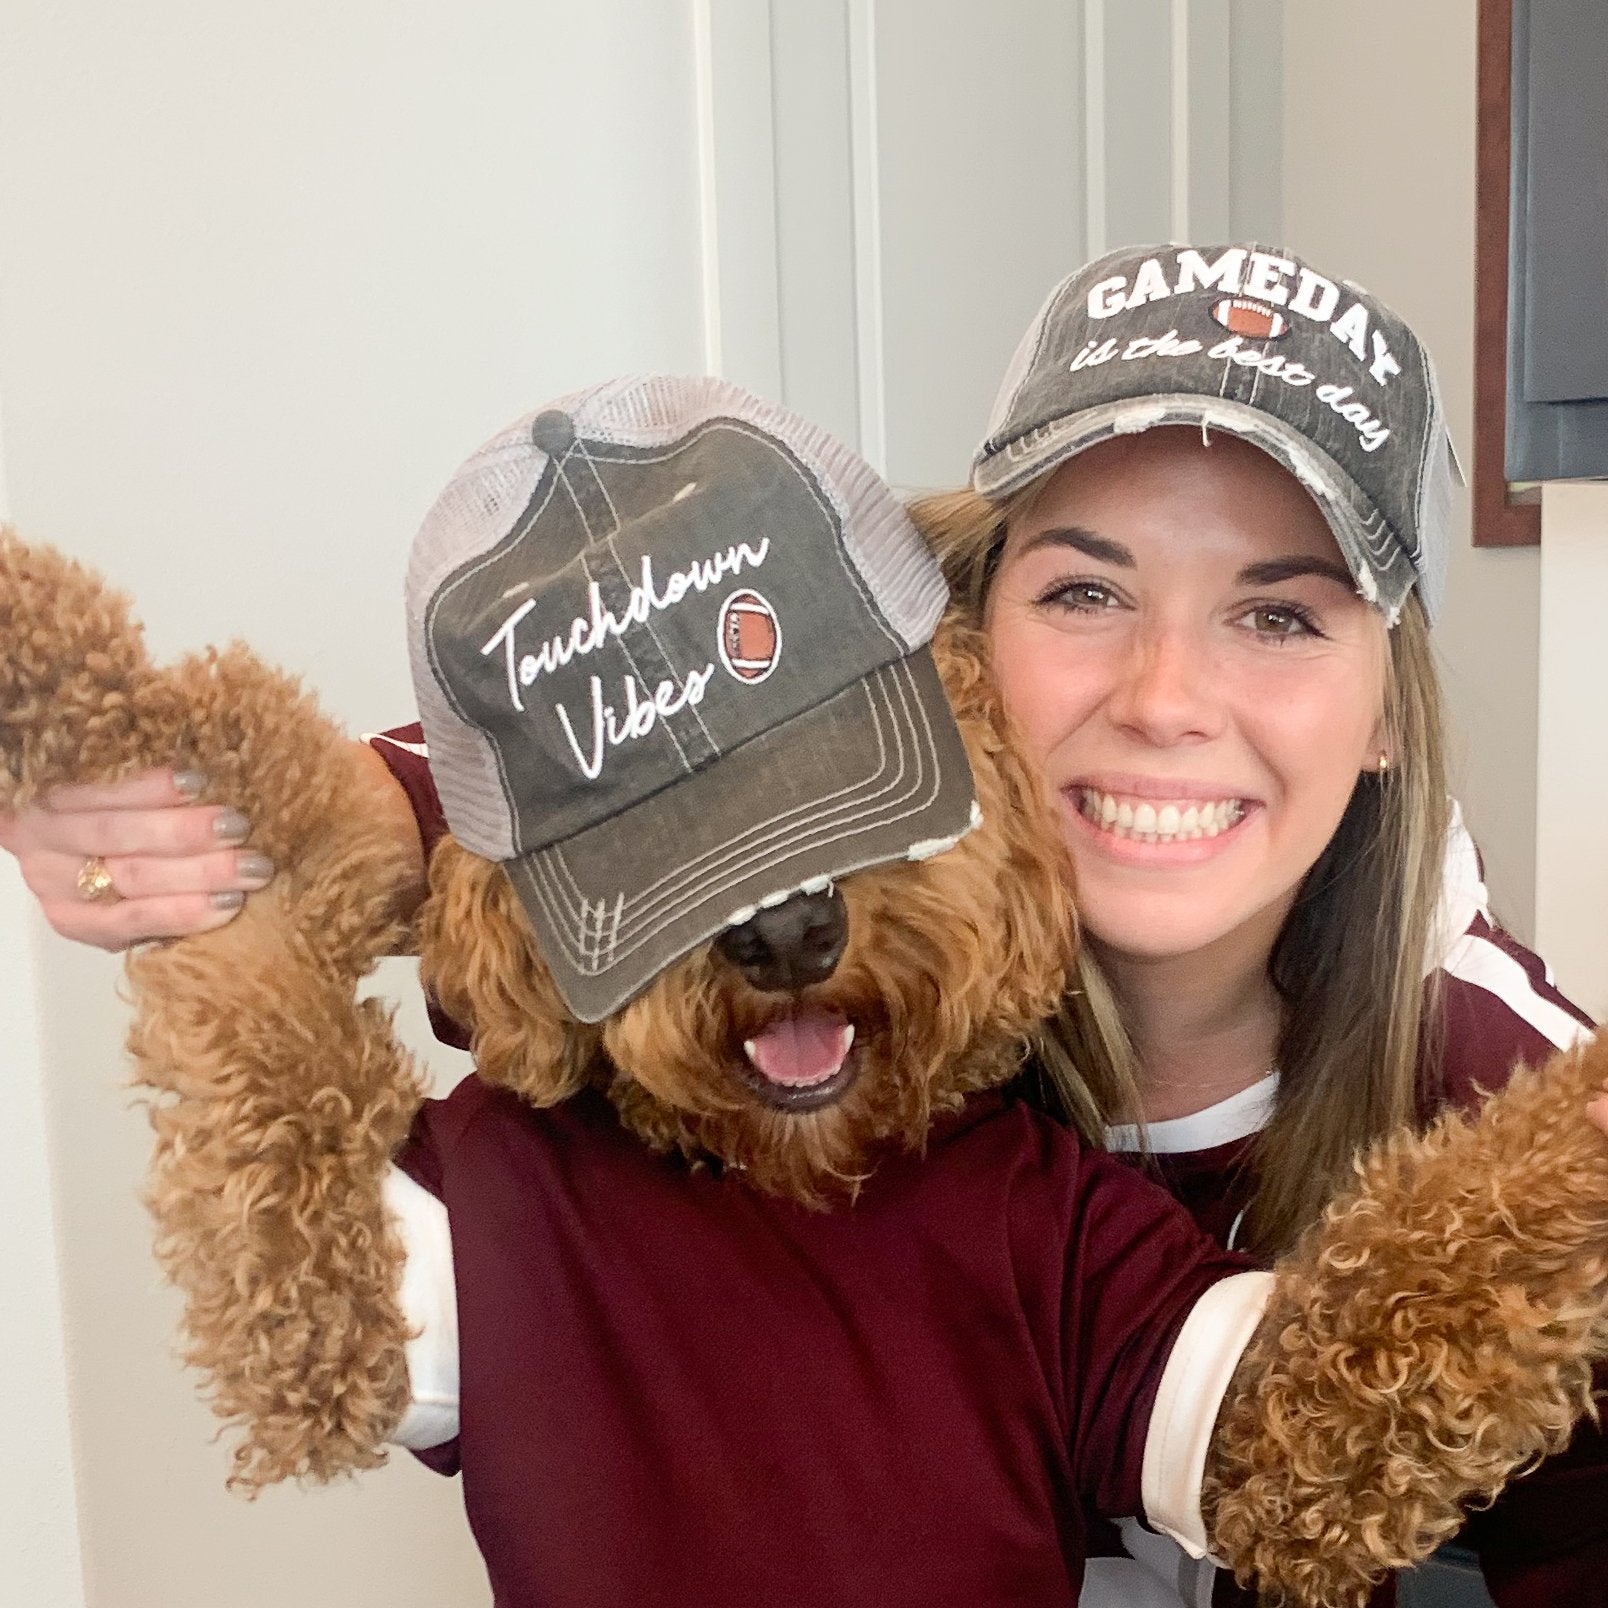 Touchdown Vibes Women's Trucker Hat has the whole family excited, from Katydid